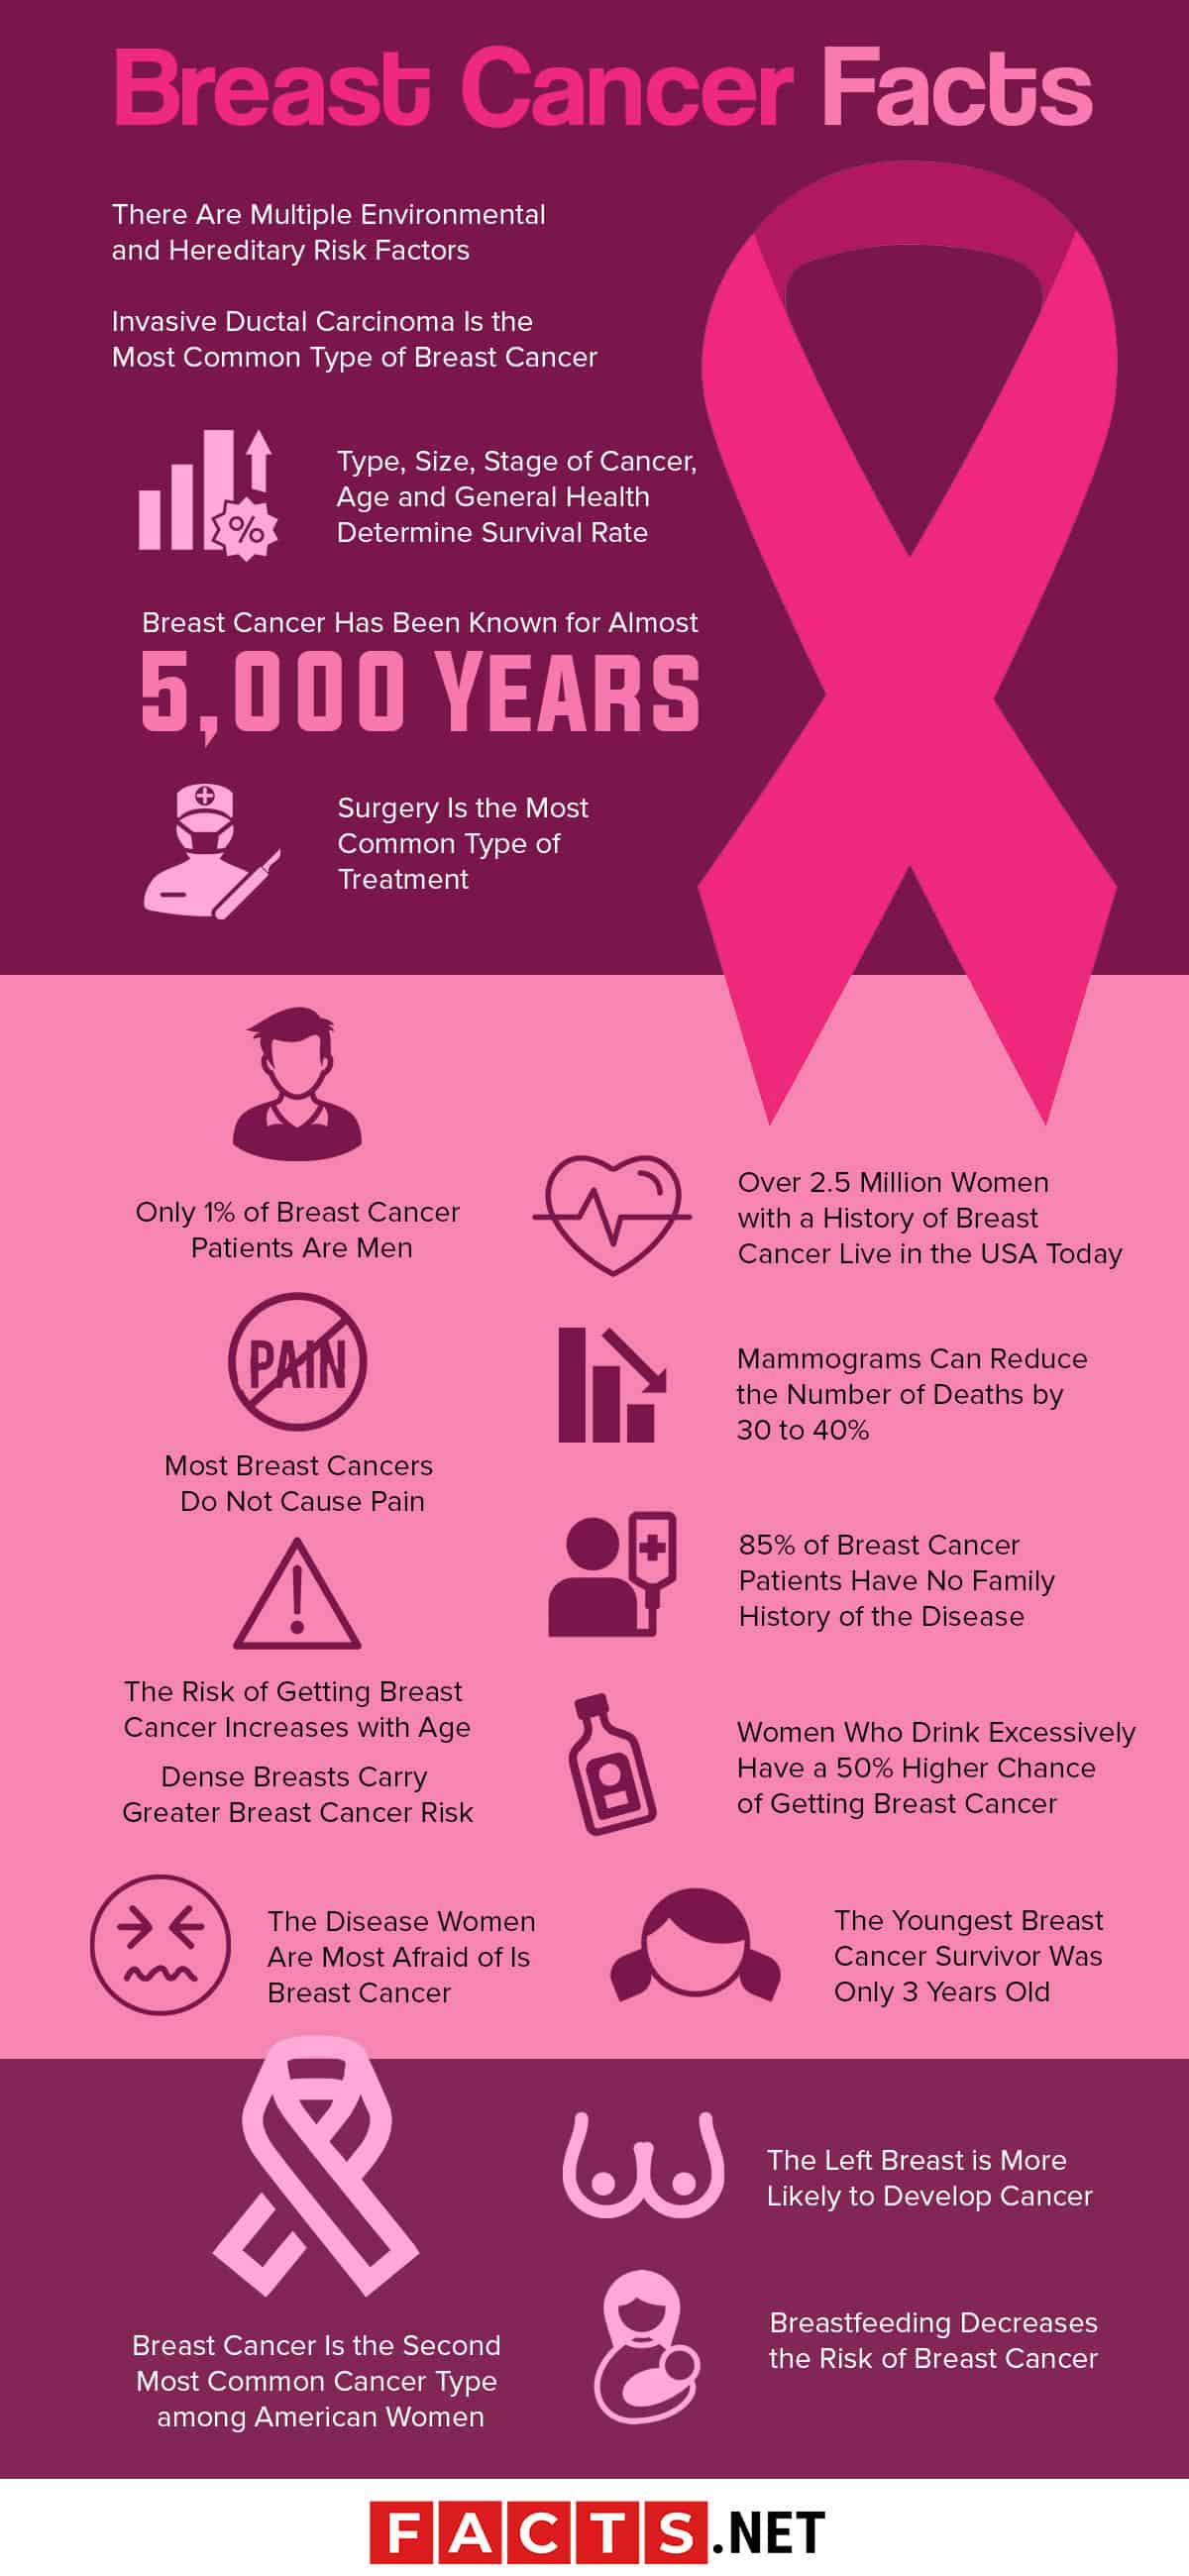 Breast Cancer Facts: Diagnosis, Prevention & More - Facts.net